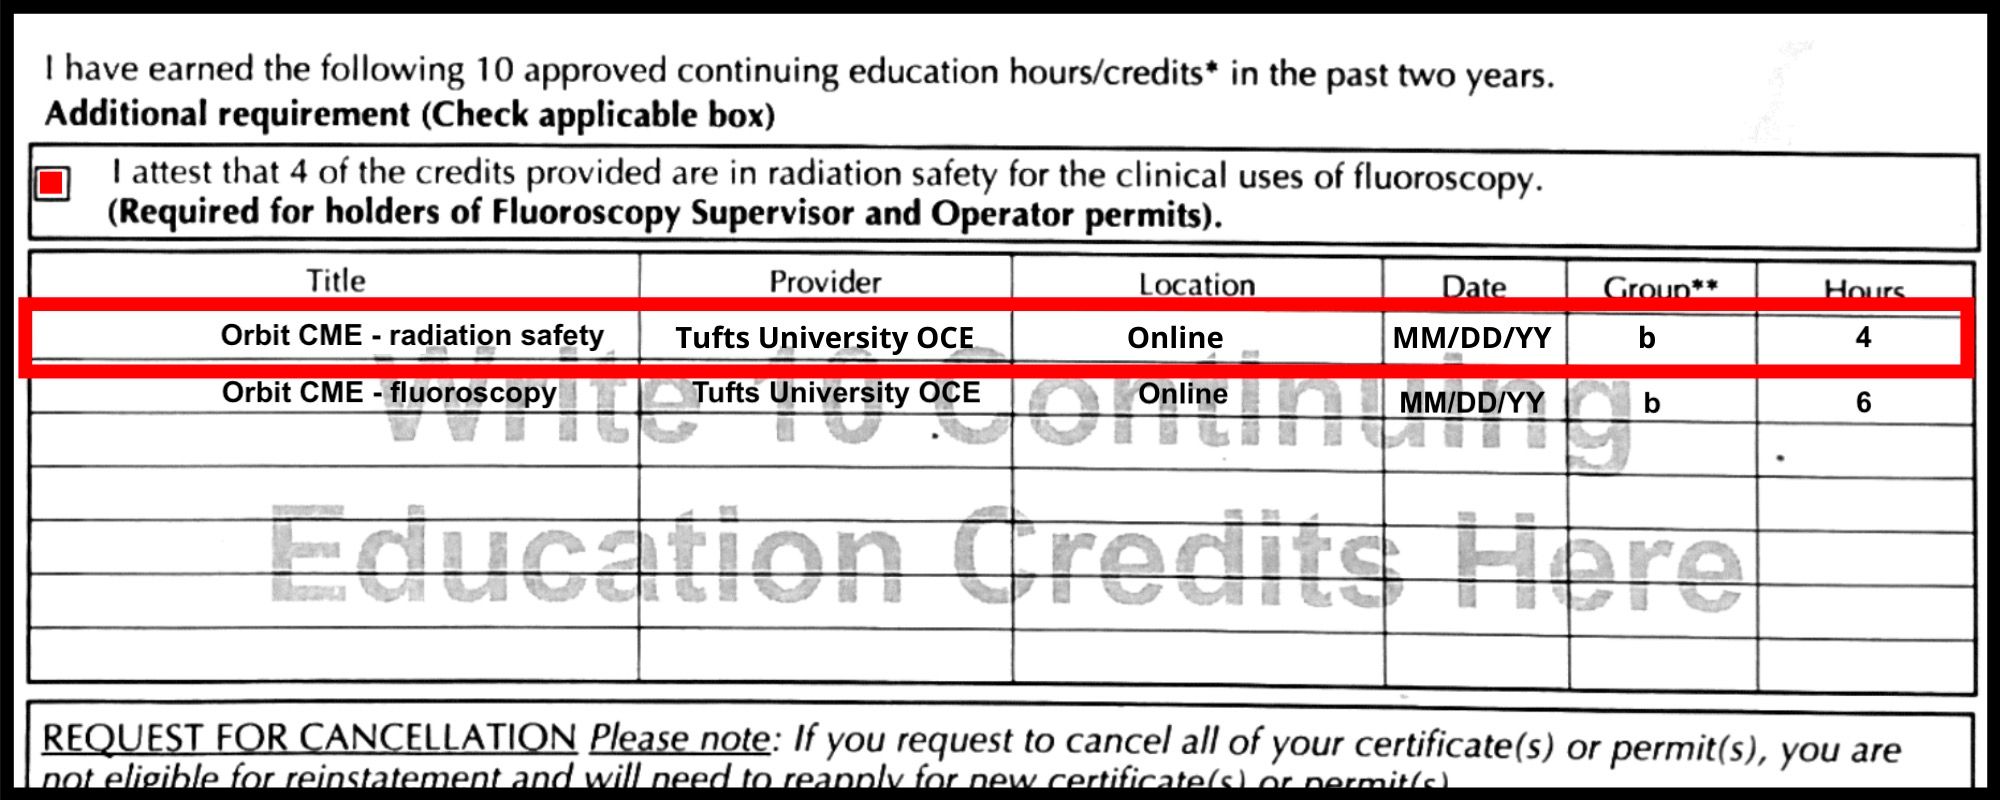 The box to check for radiation safety attestation is highlighted in red and a red box surrounds the items you need to write in the chart to document cme credits earned. For Orbit CME they are Title: Orbit CME, Provider: Tufts University OCE, Location: Online, Date: MM/DD/YY, Group: b, Hours: 10